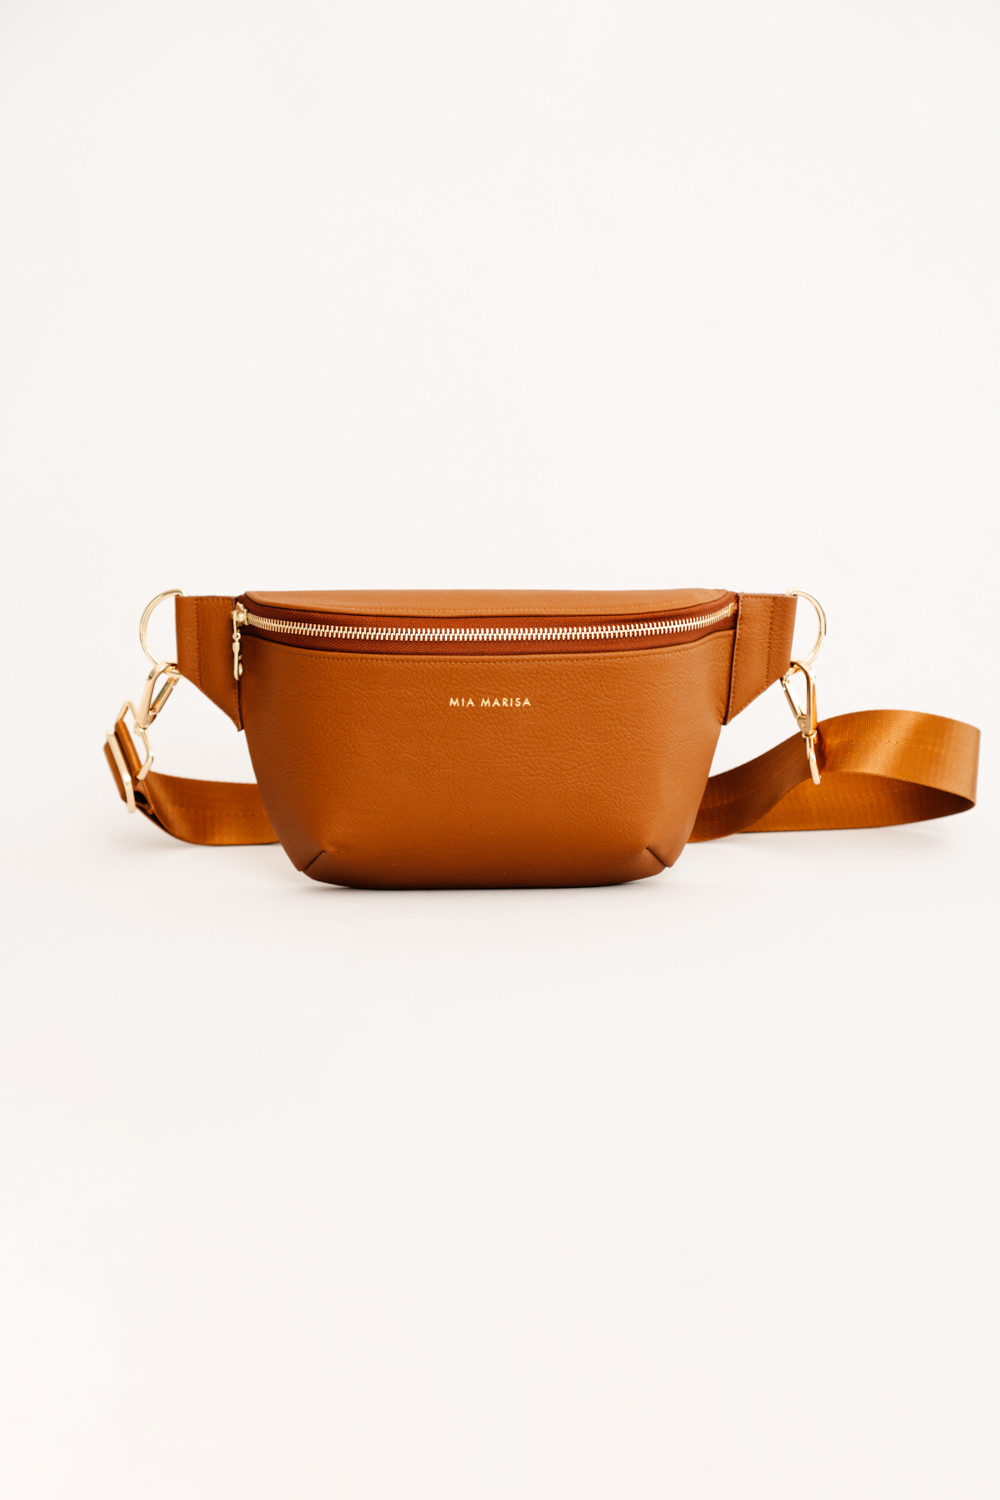 Front view bum bag in the color cognac brown for women